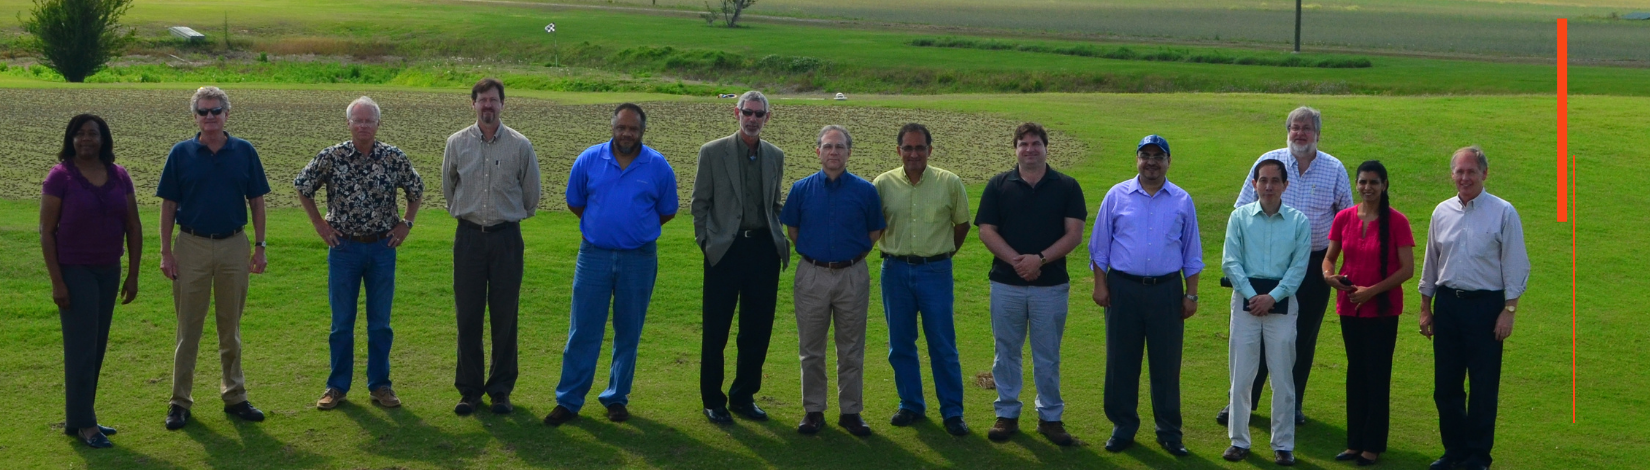 A photo of the CRS advisory board members in a field at UF.